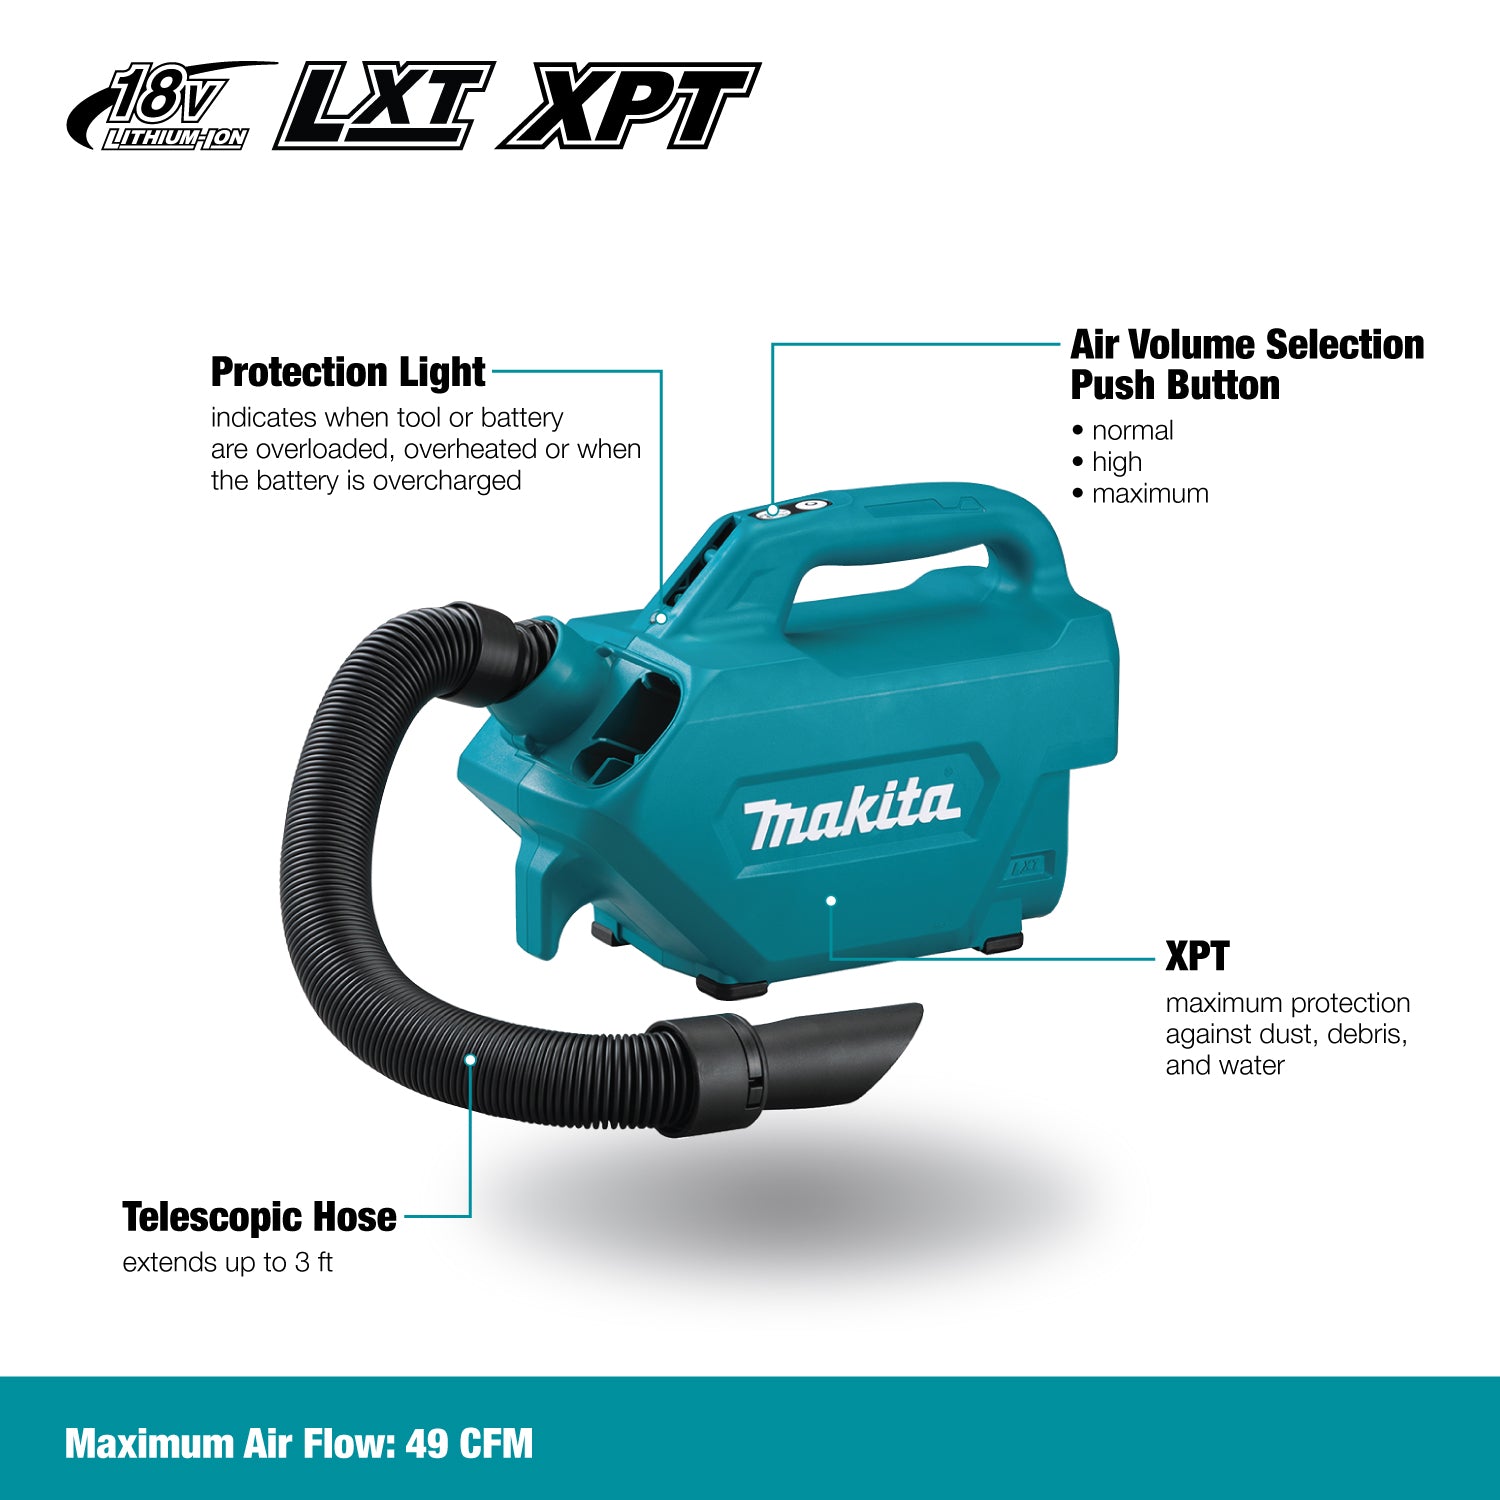 Makita DCL184Z - 18V LXT Vacuum Cleaner (500ml)